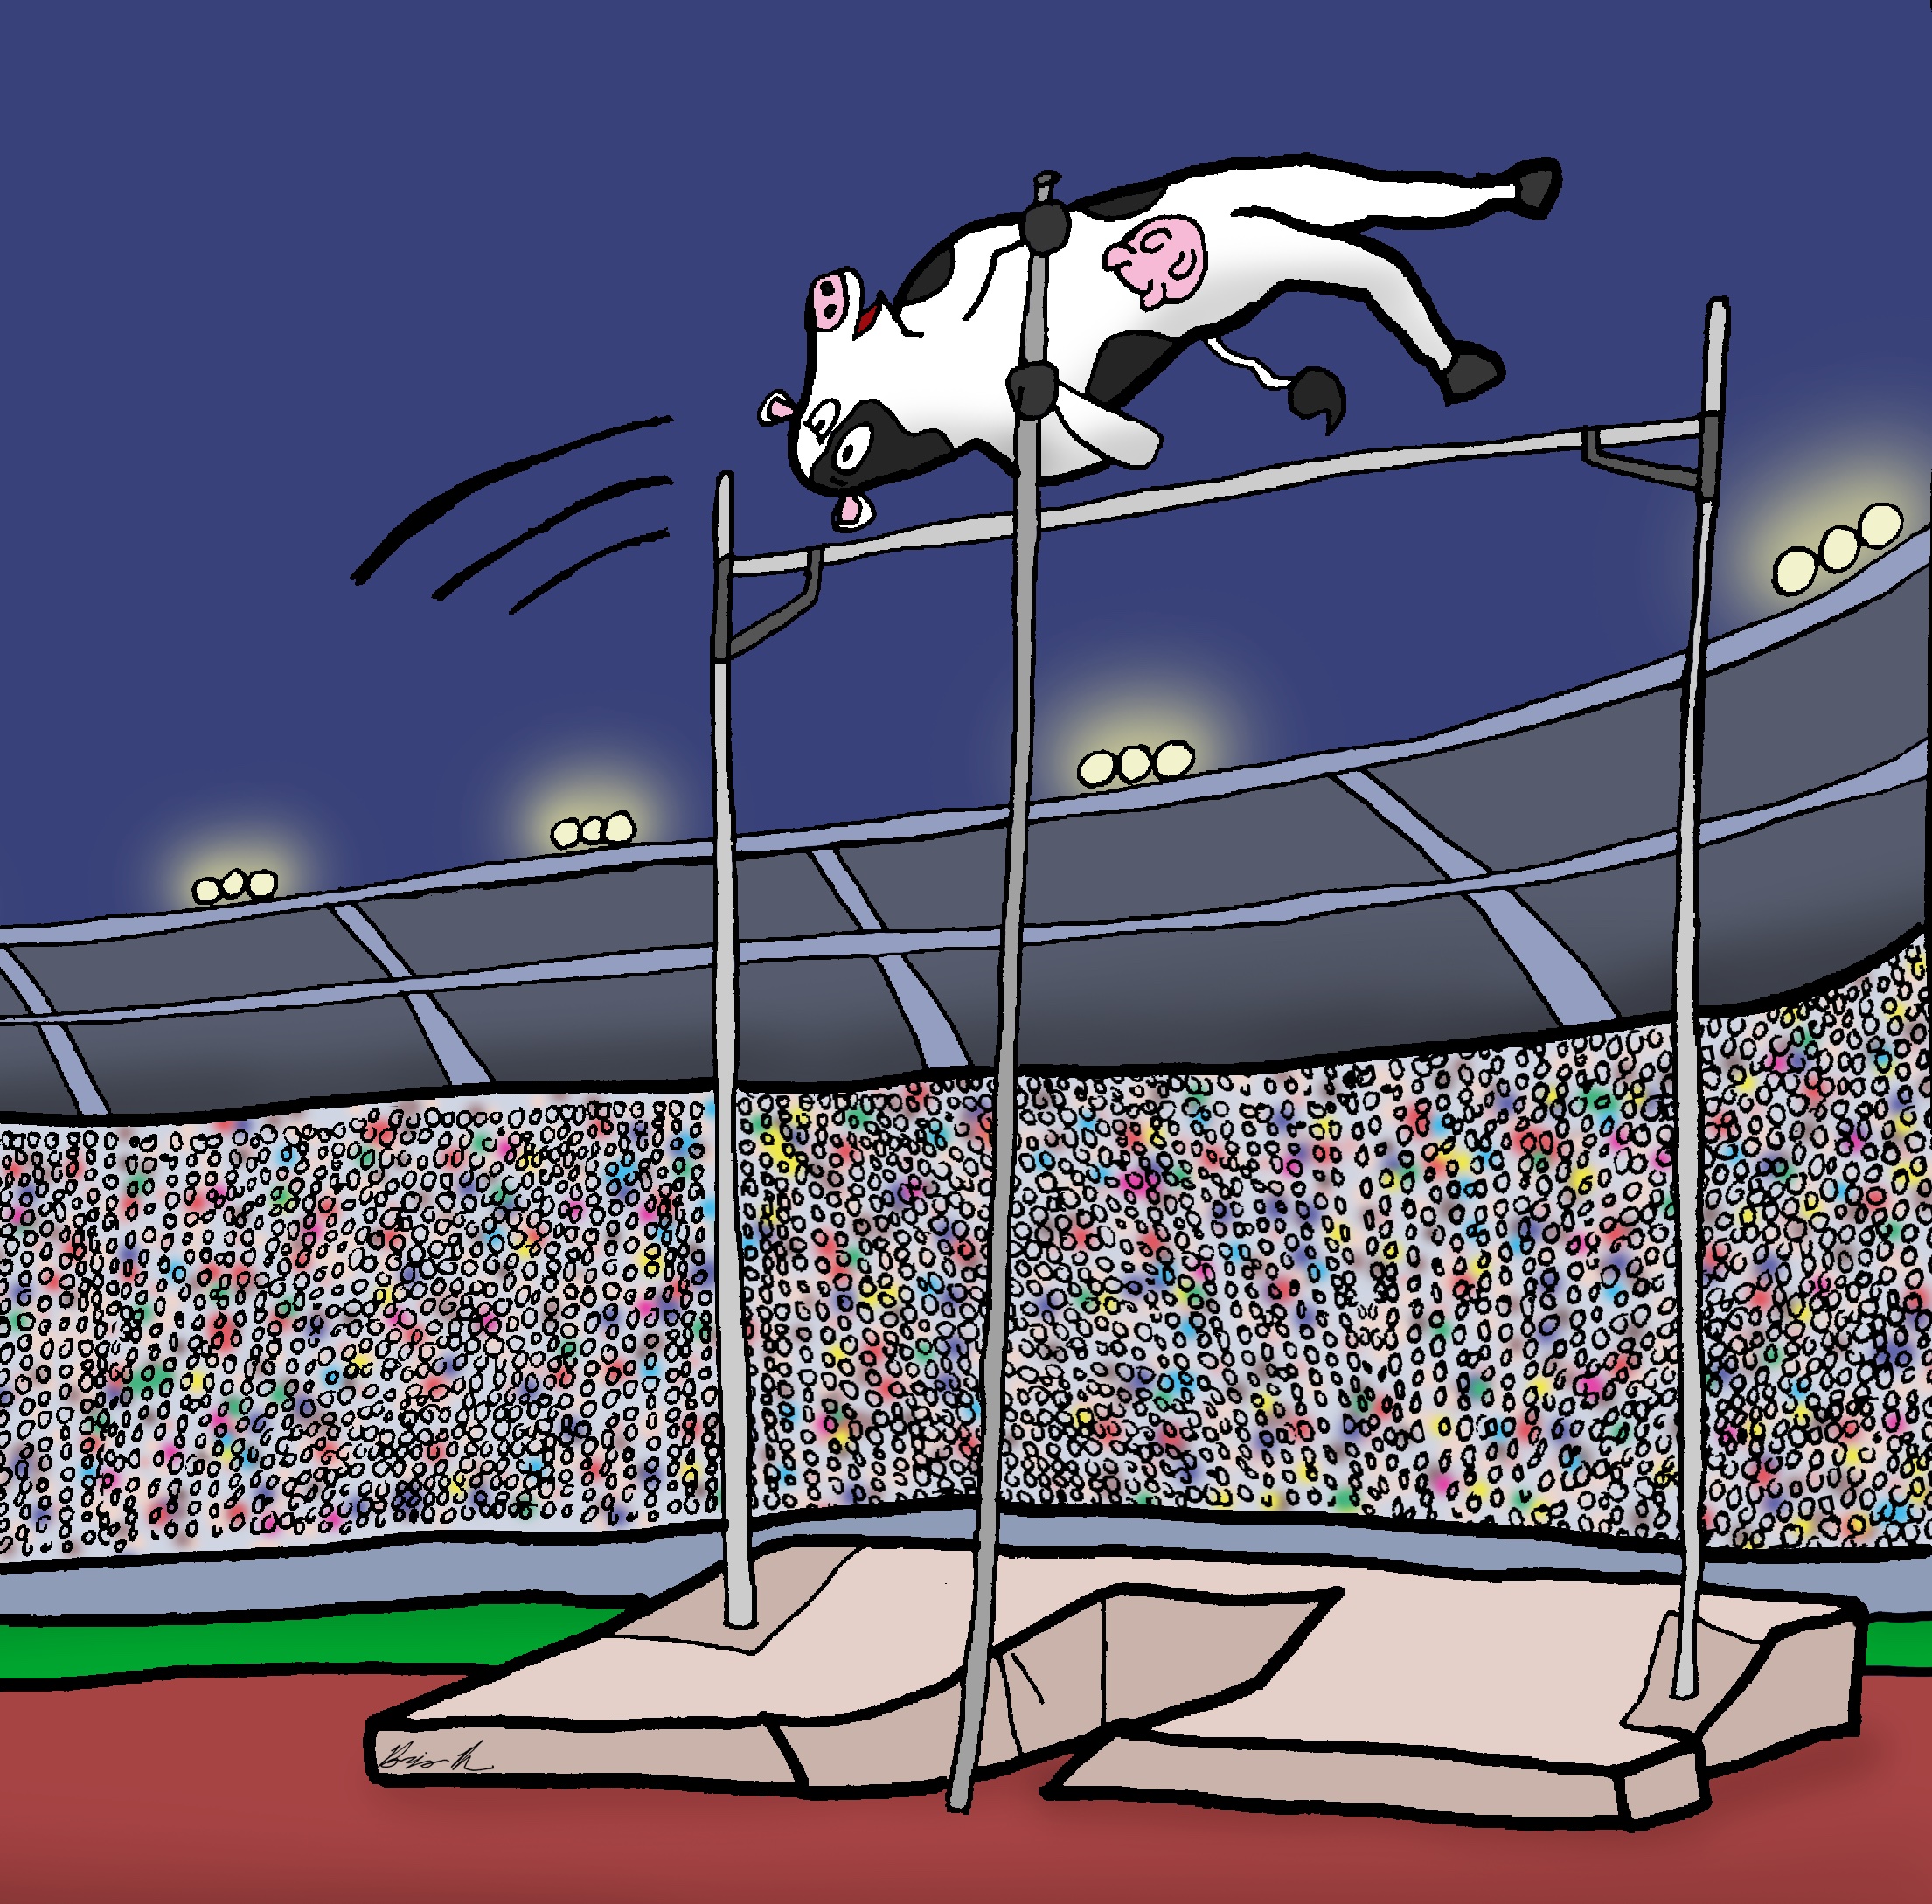 A cow pole vaulting in a crowded sports stadium. The Caption Contest October 2022